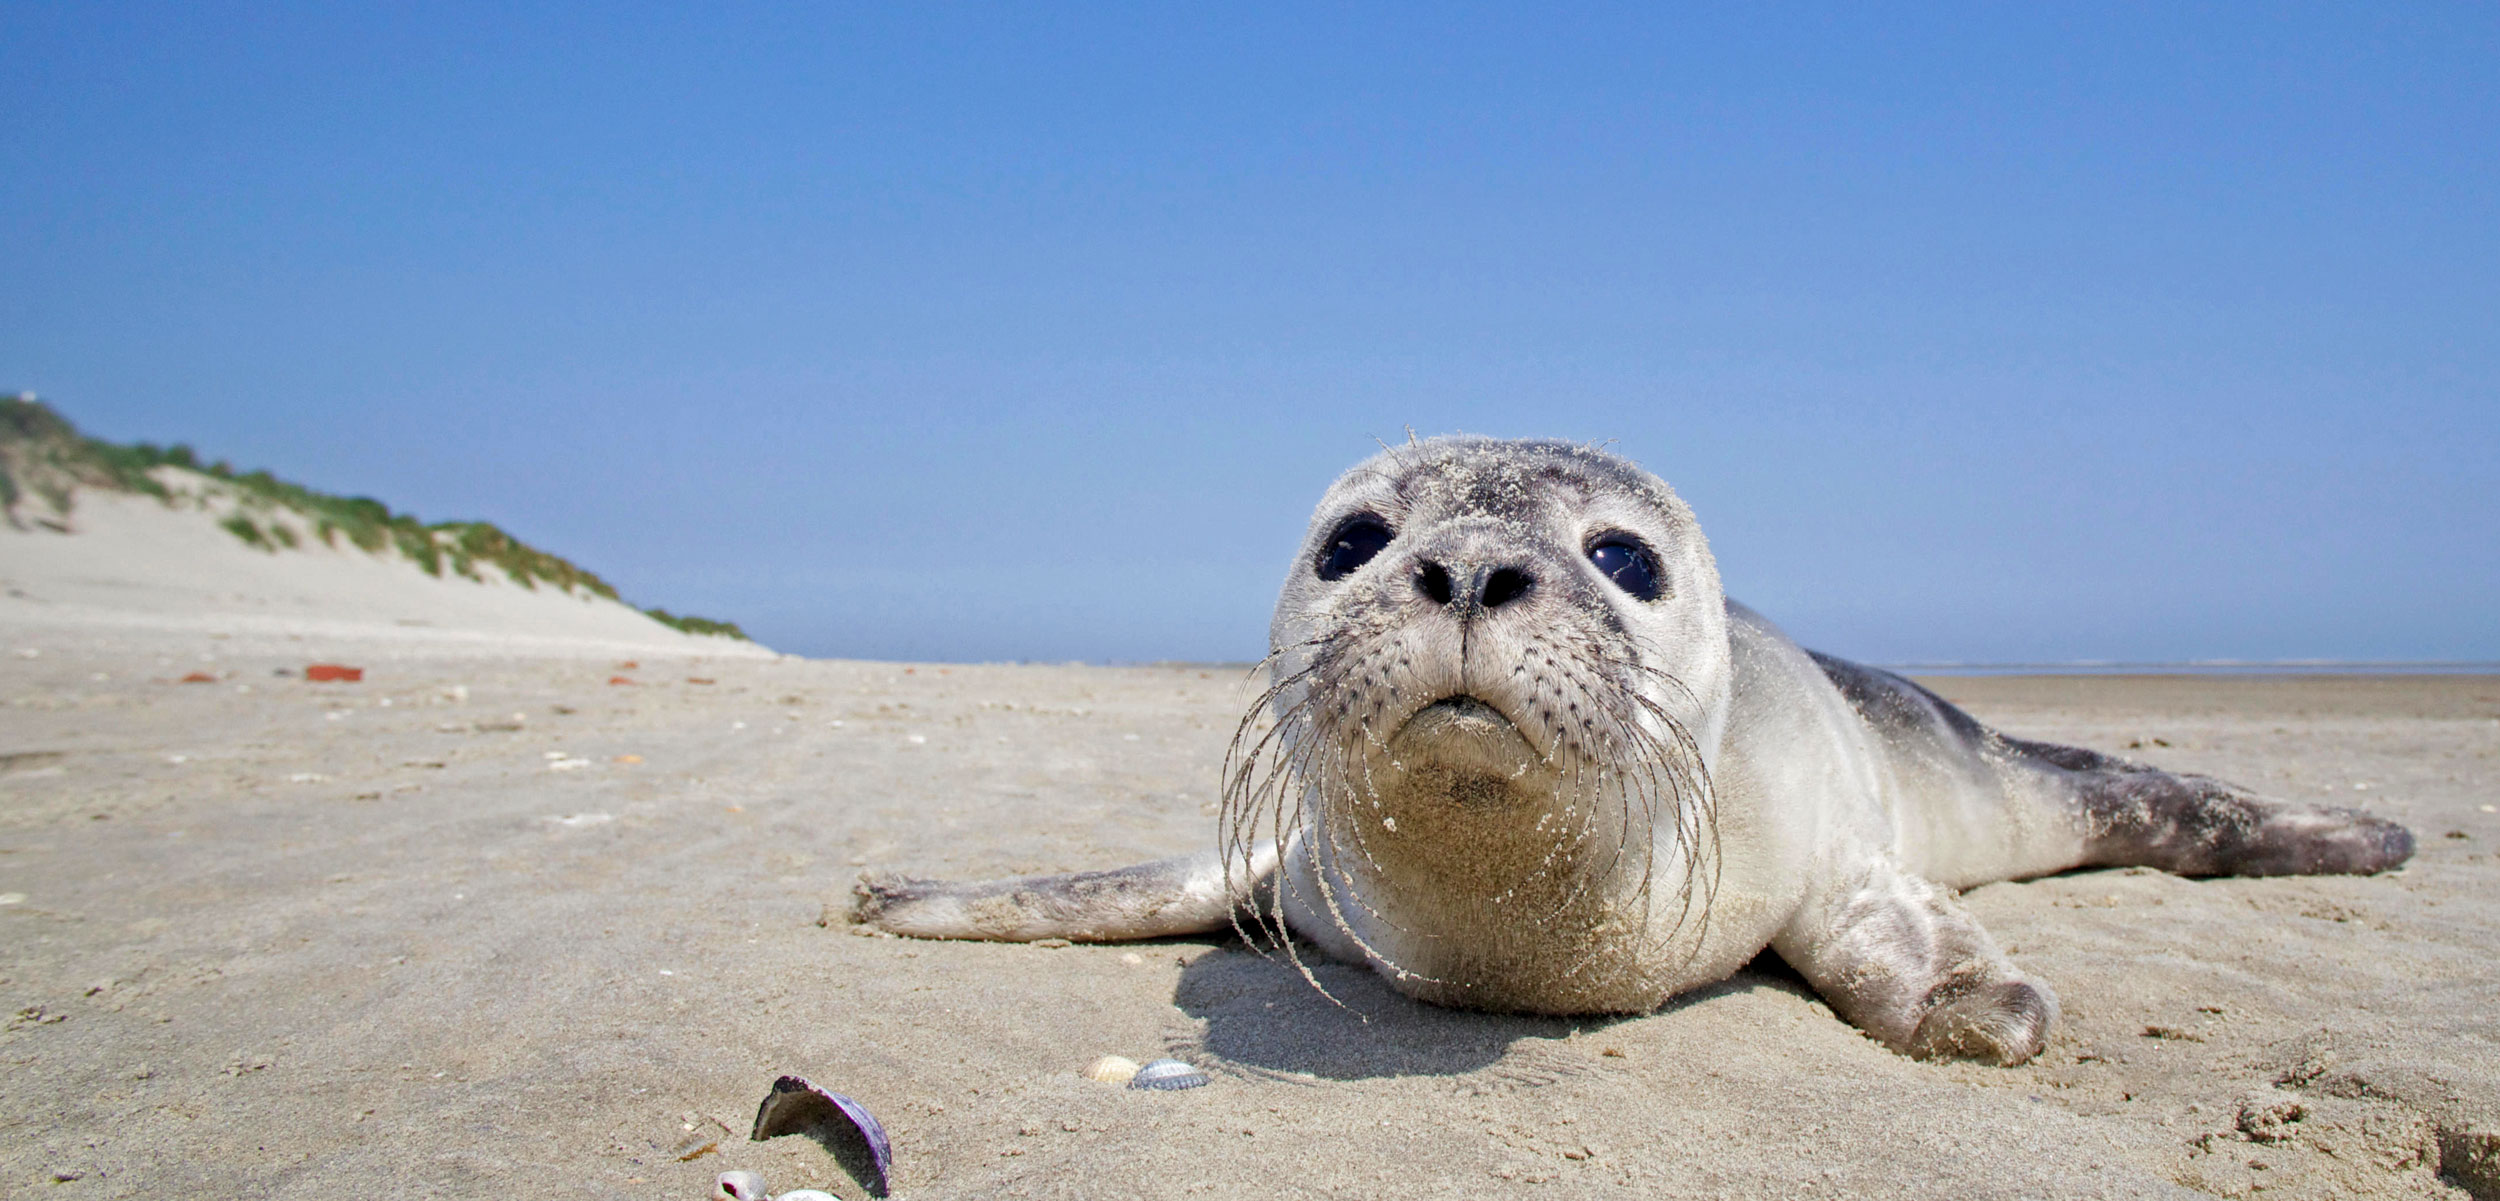 A young Harbour Seal (Phoca vitulina) on the beach of Rottumerplaat